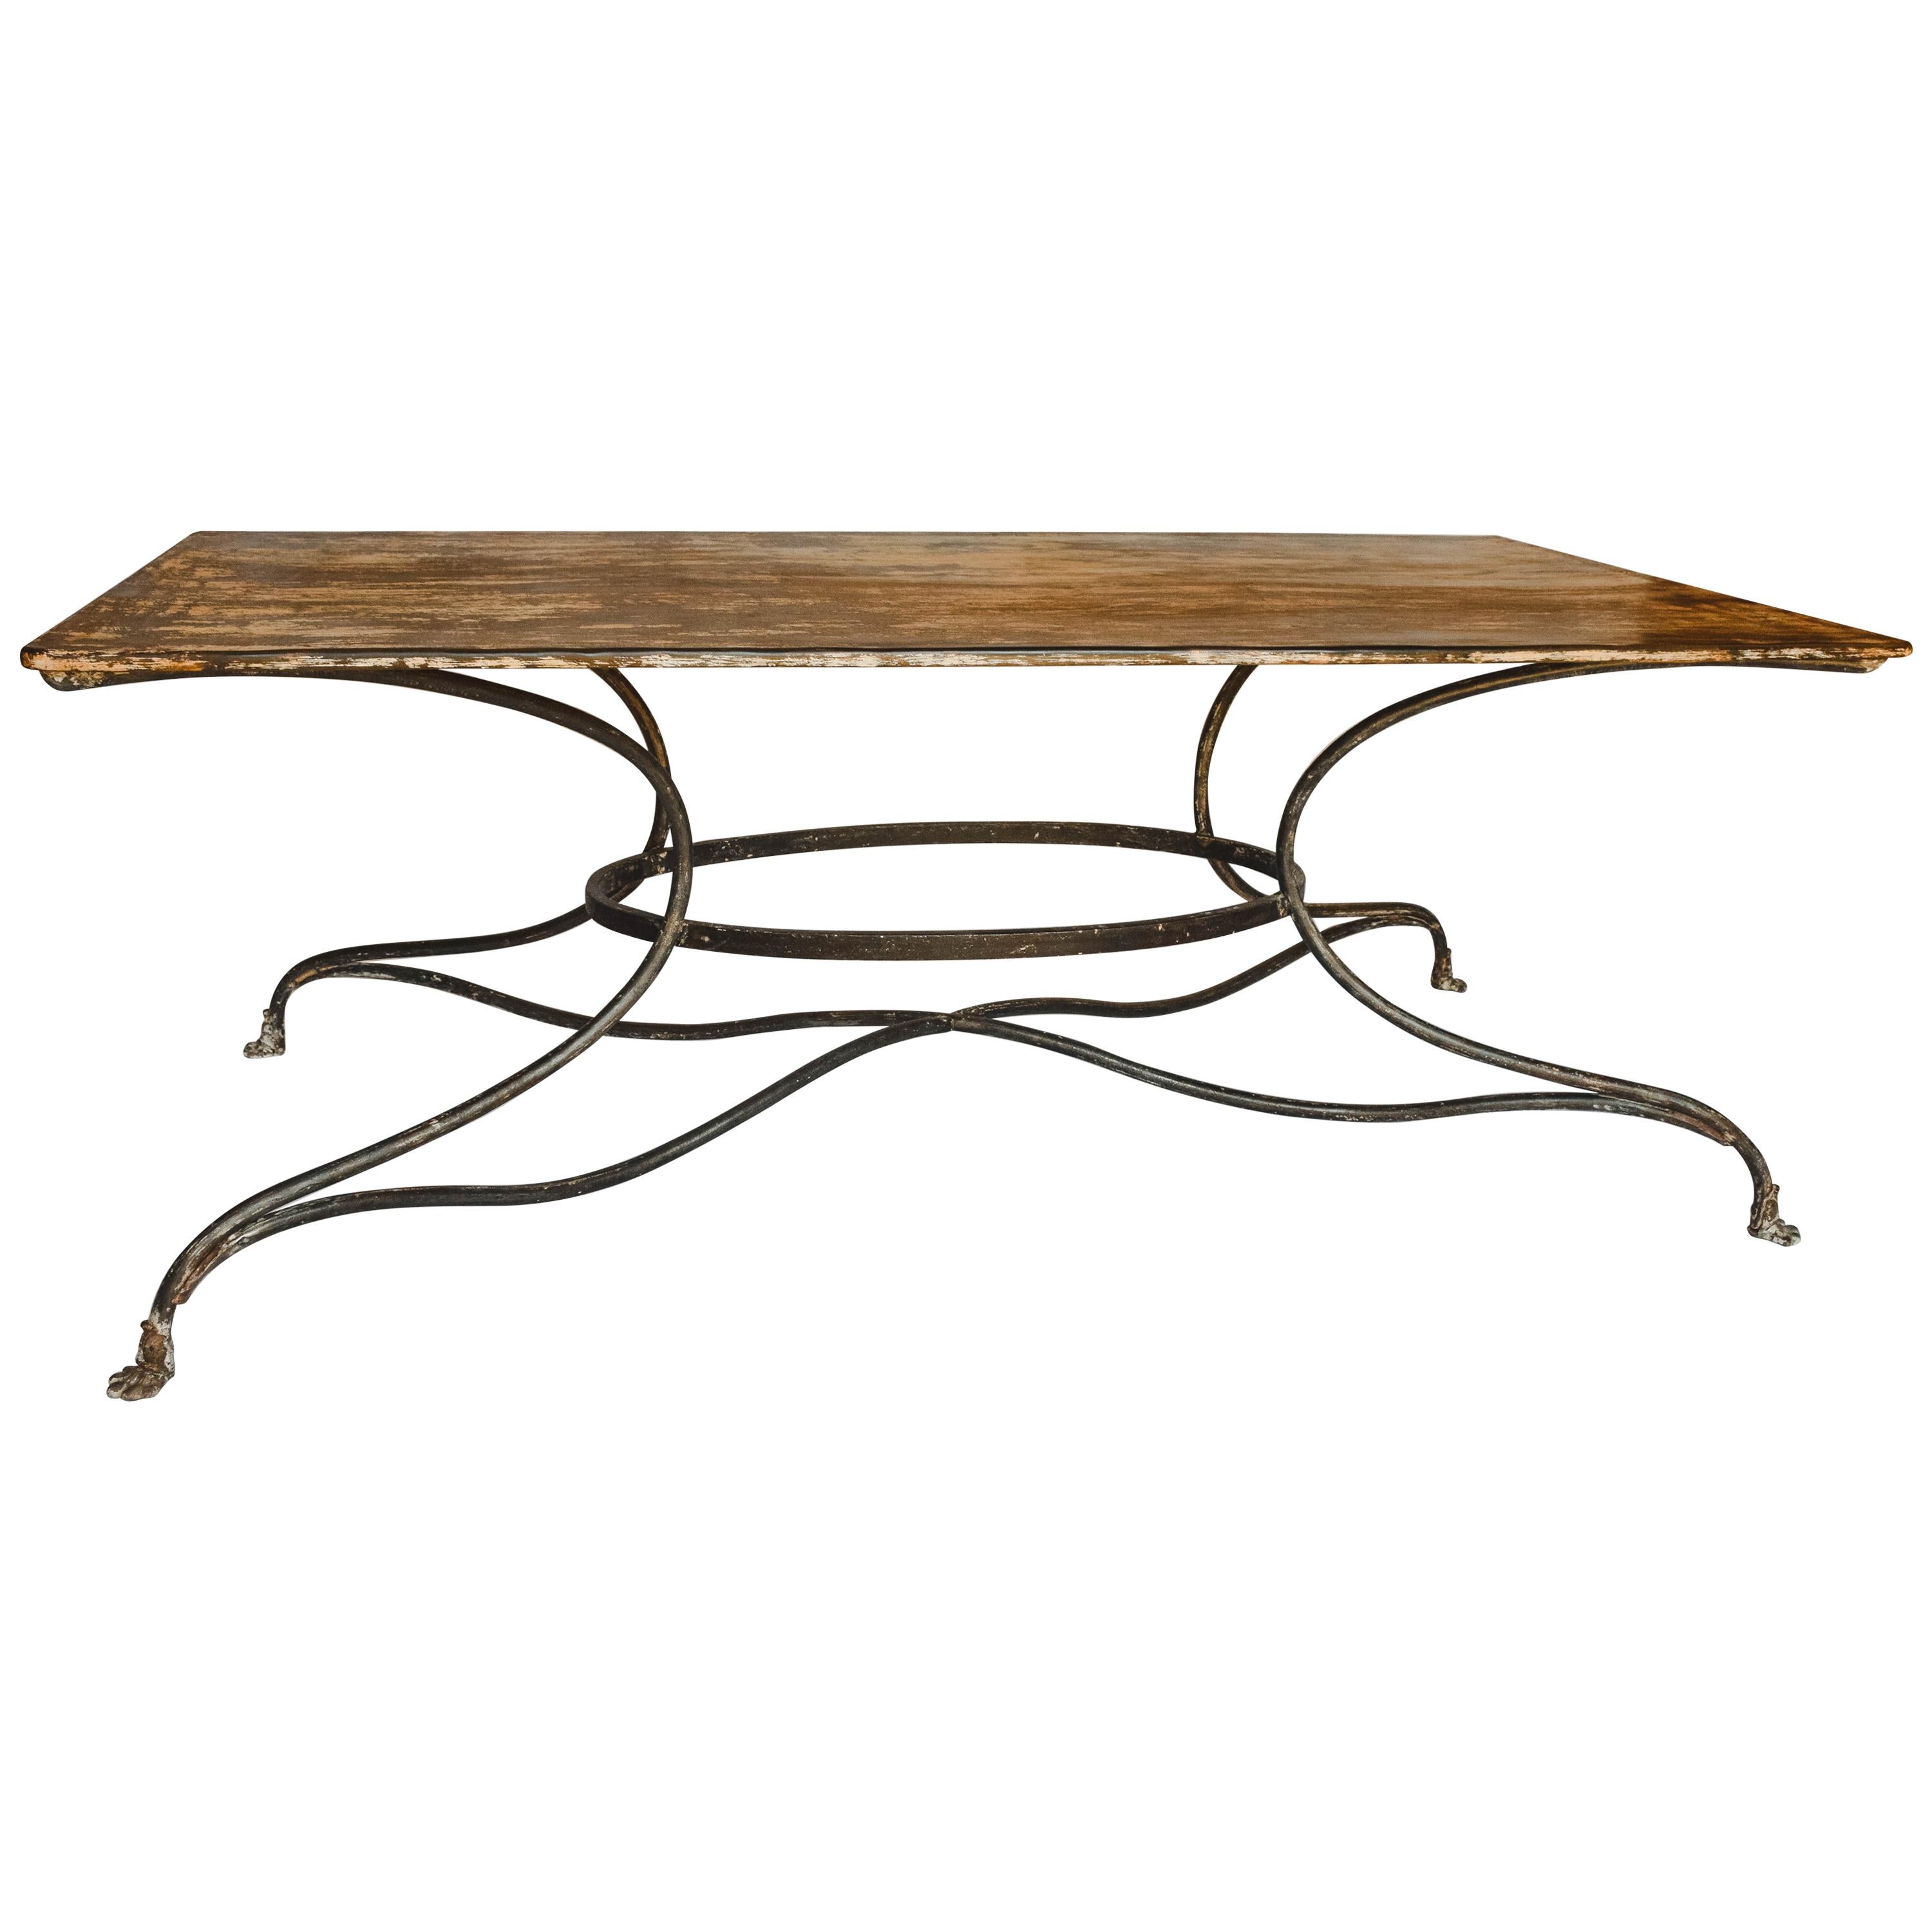 Large French Wrought Iron Garden Table from Arras with Rectangular Top